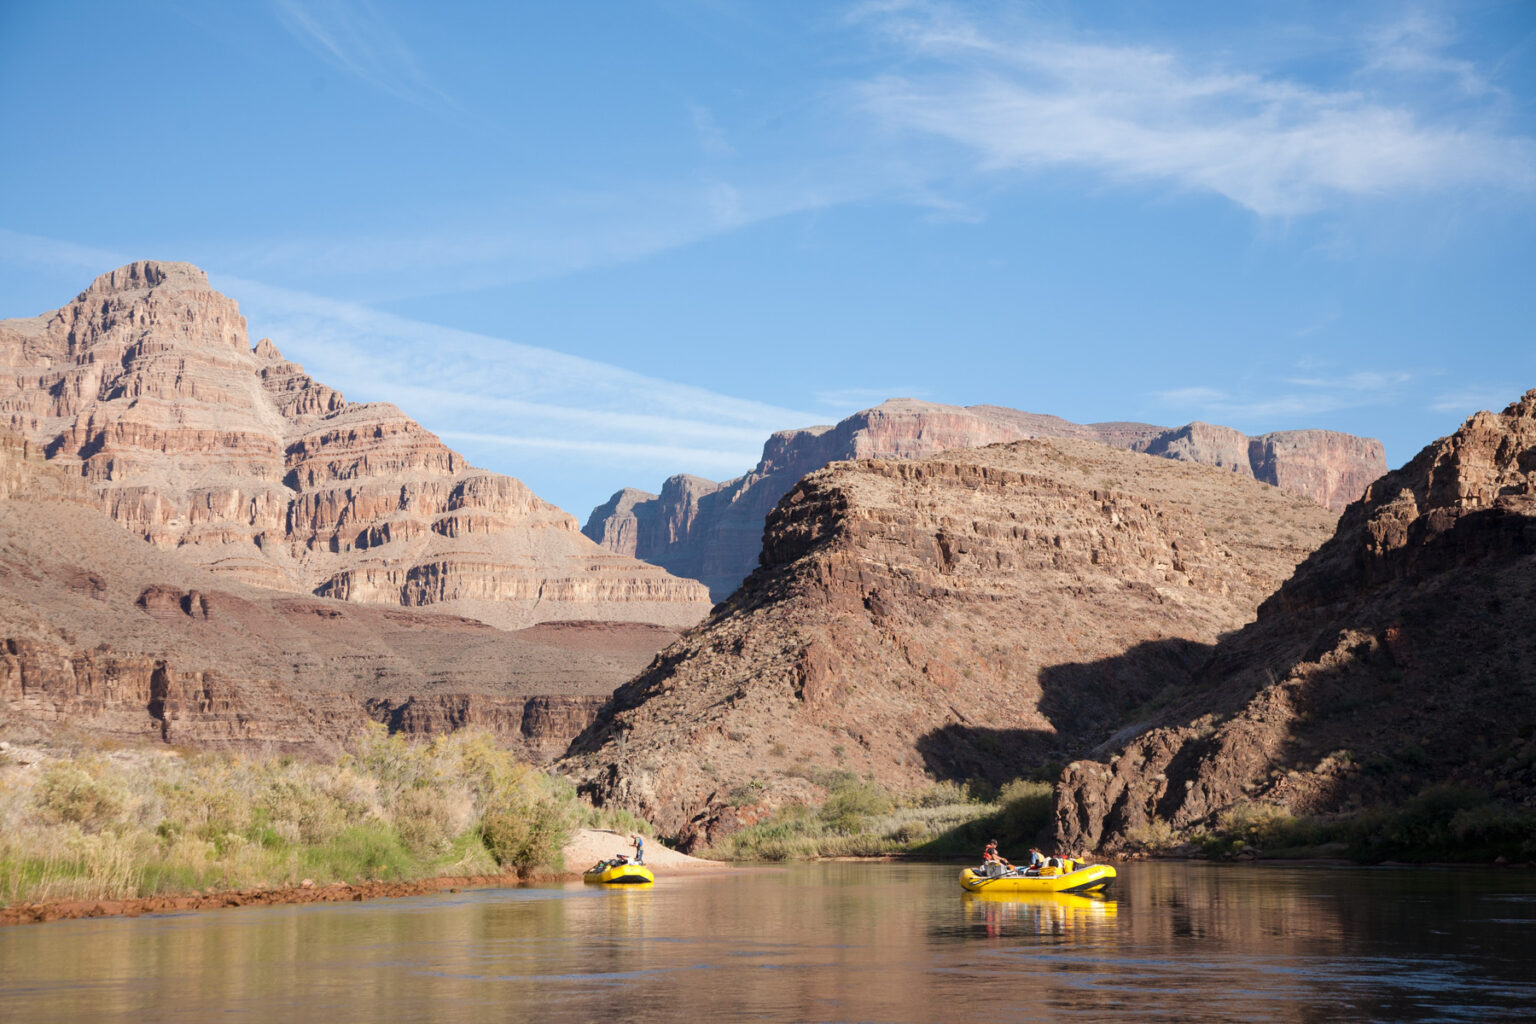 Two OARS rafts in calm water in lower section of Grand Canyon